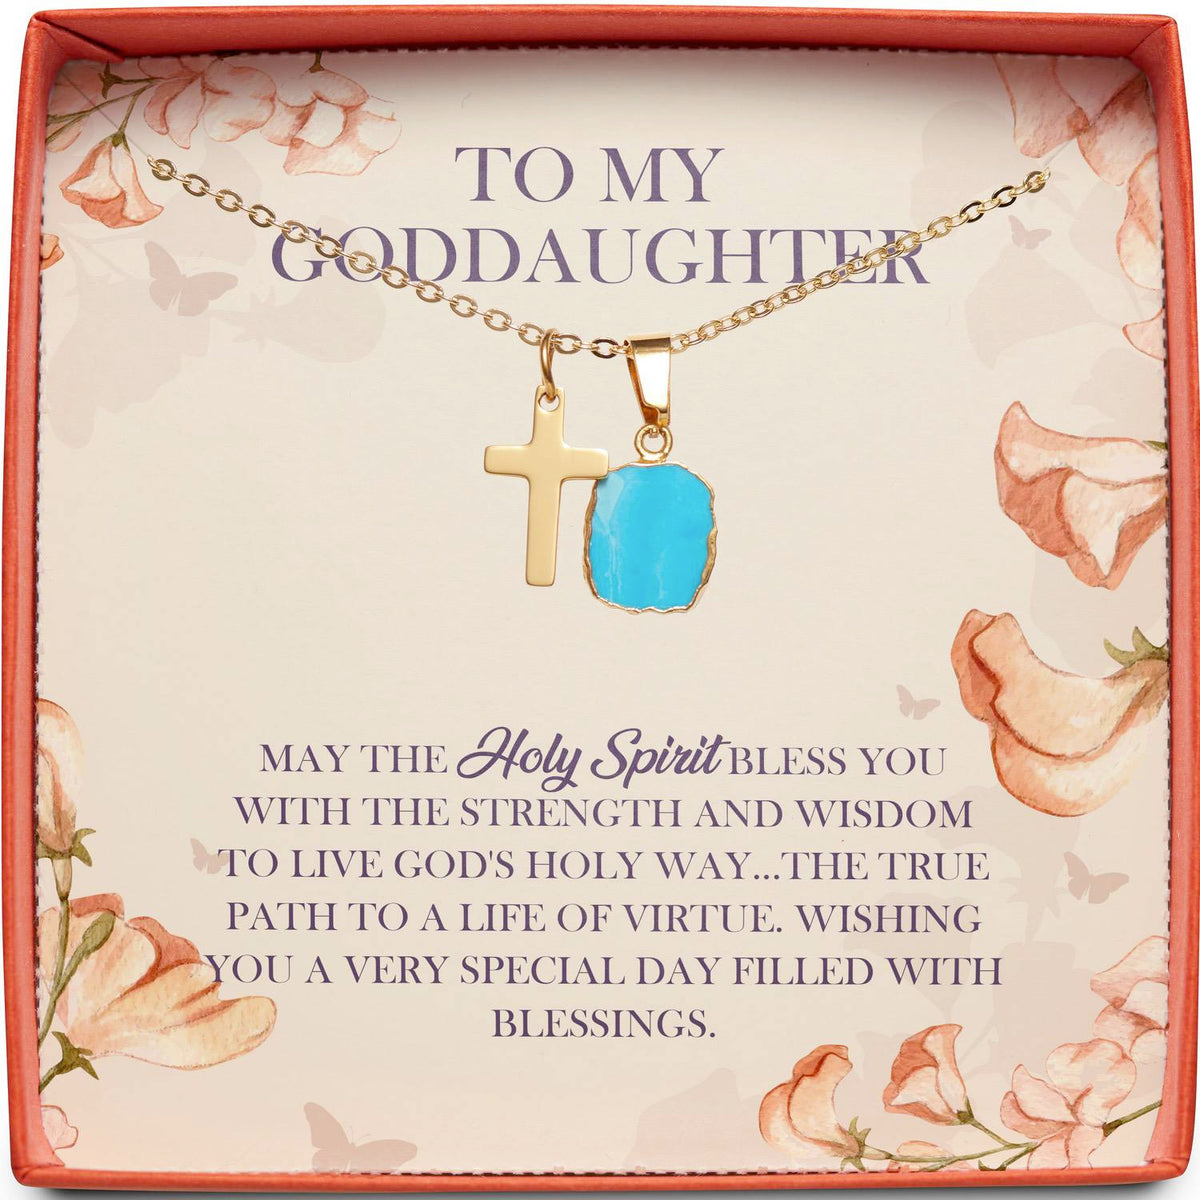 To My Goddaughter | May the Holy Spirit Bless You | Cross Necklace